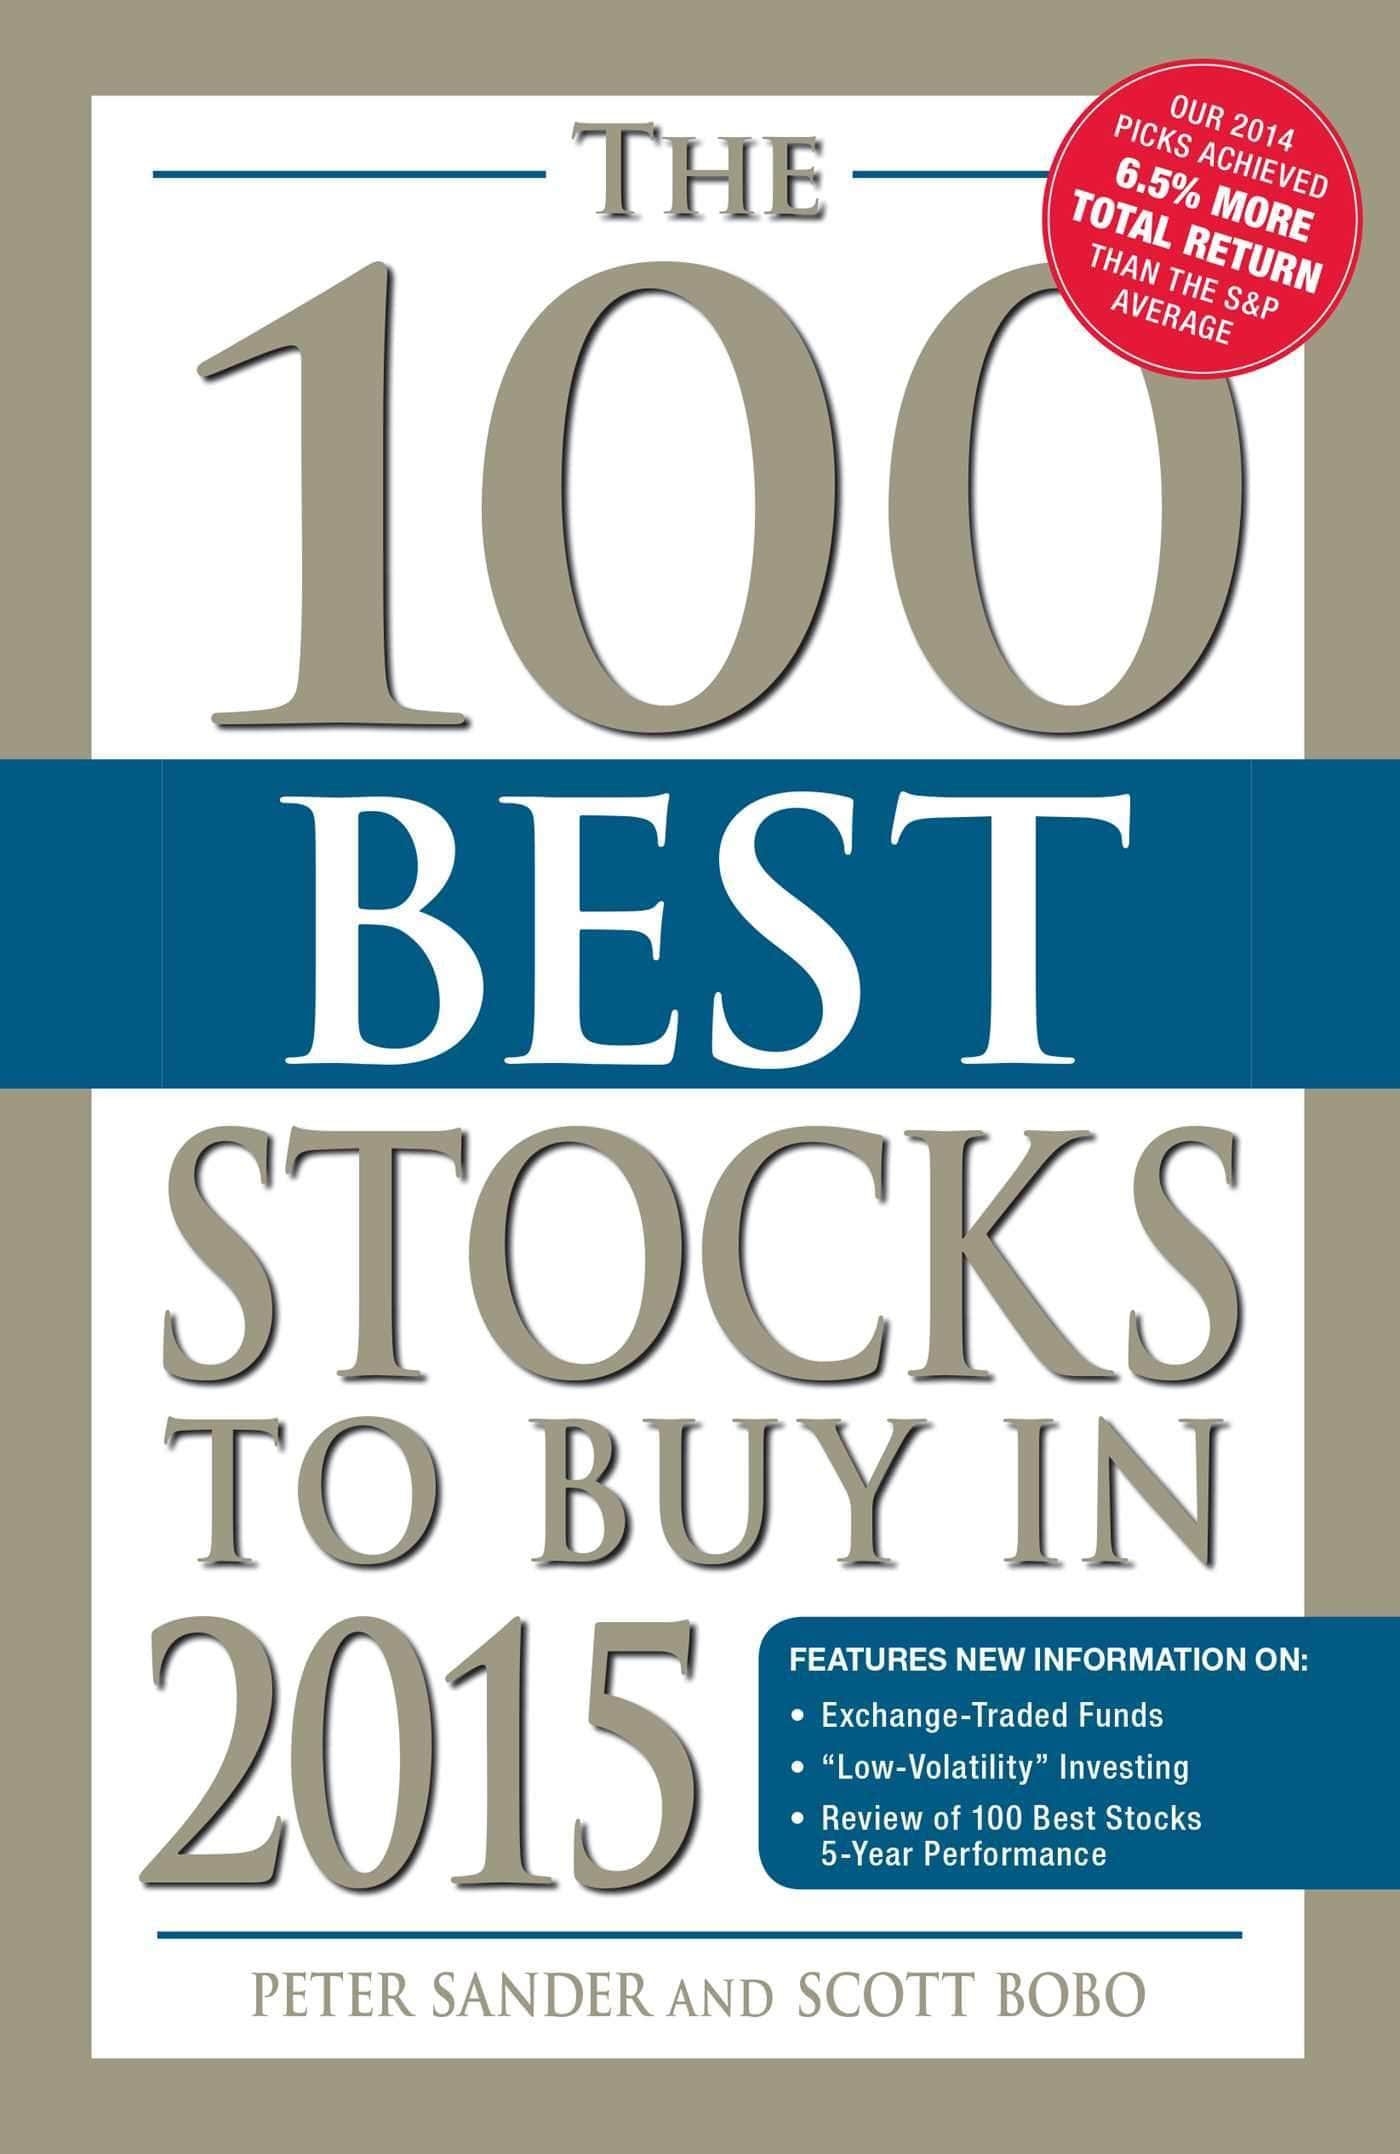 THE 100 BEST STOCK TO BUY IN 2015